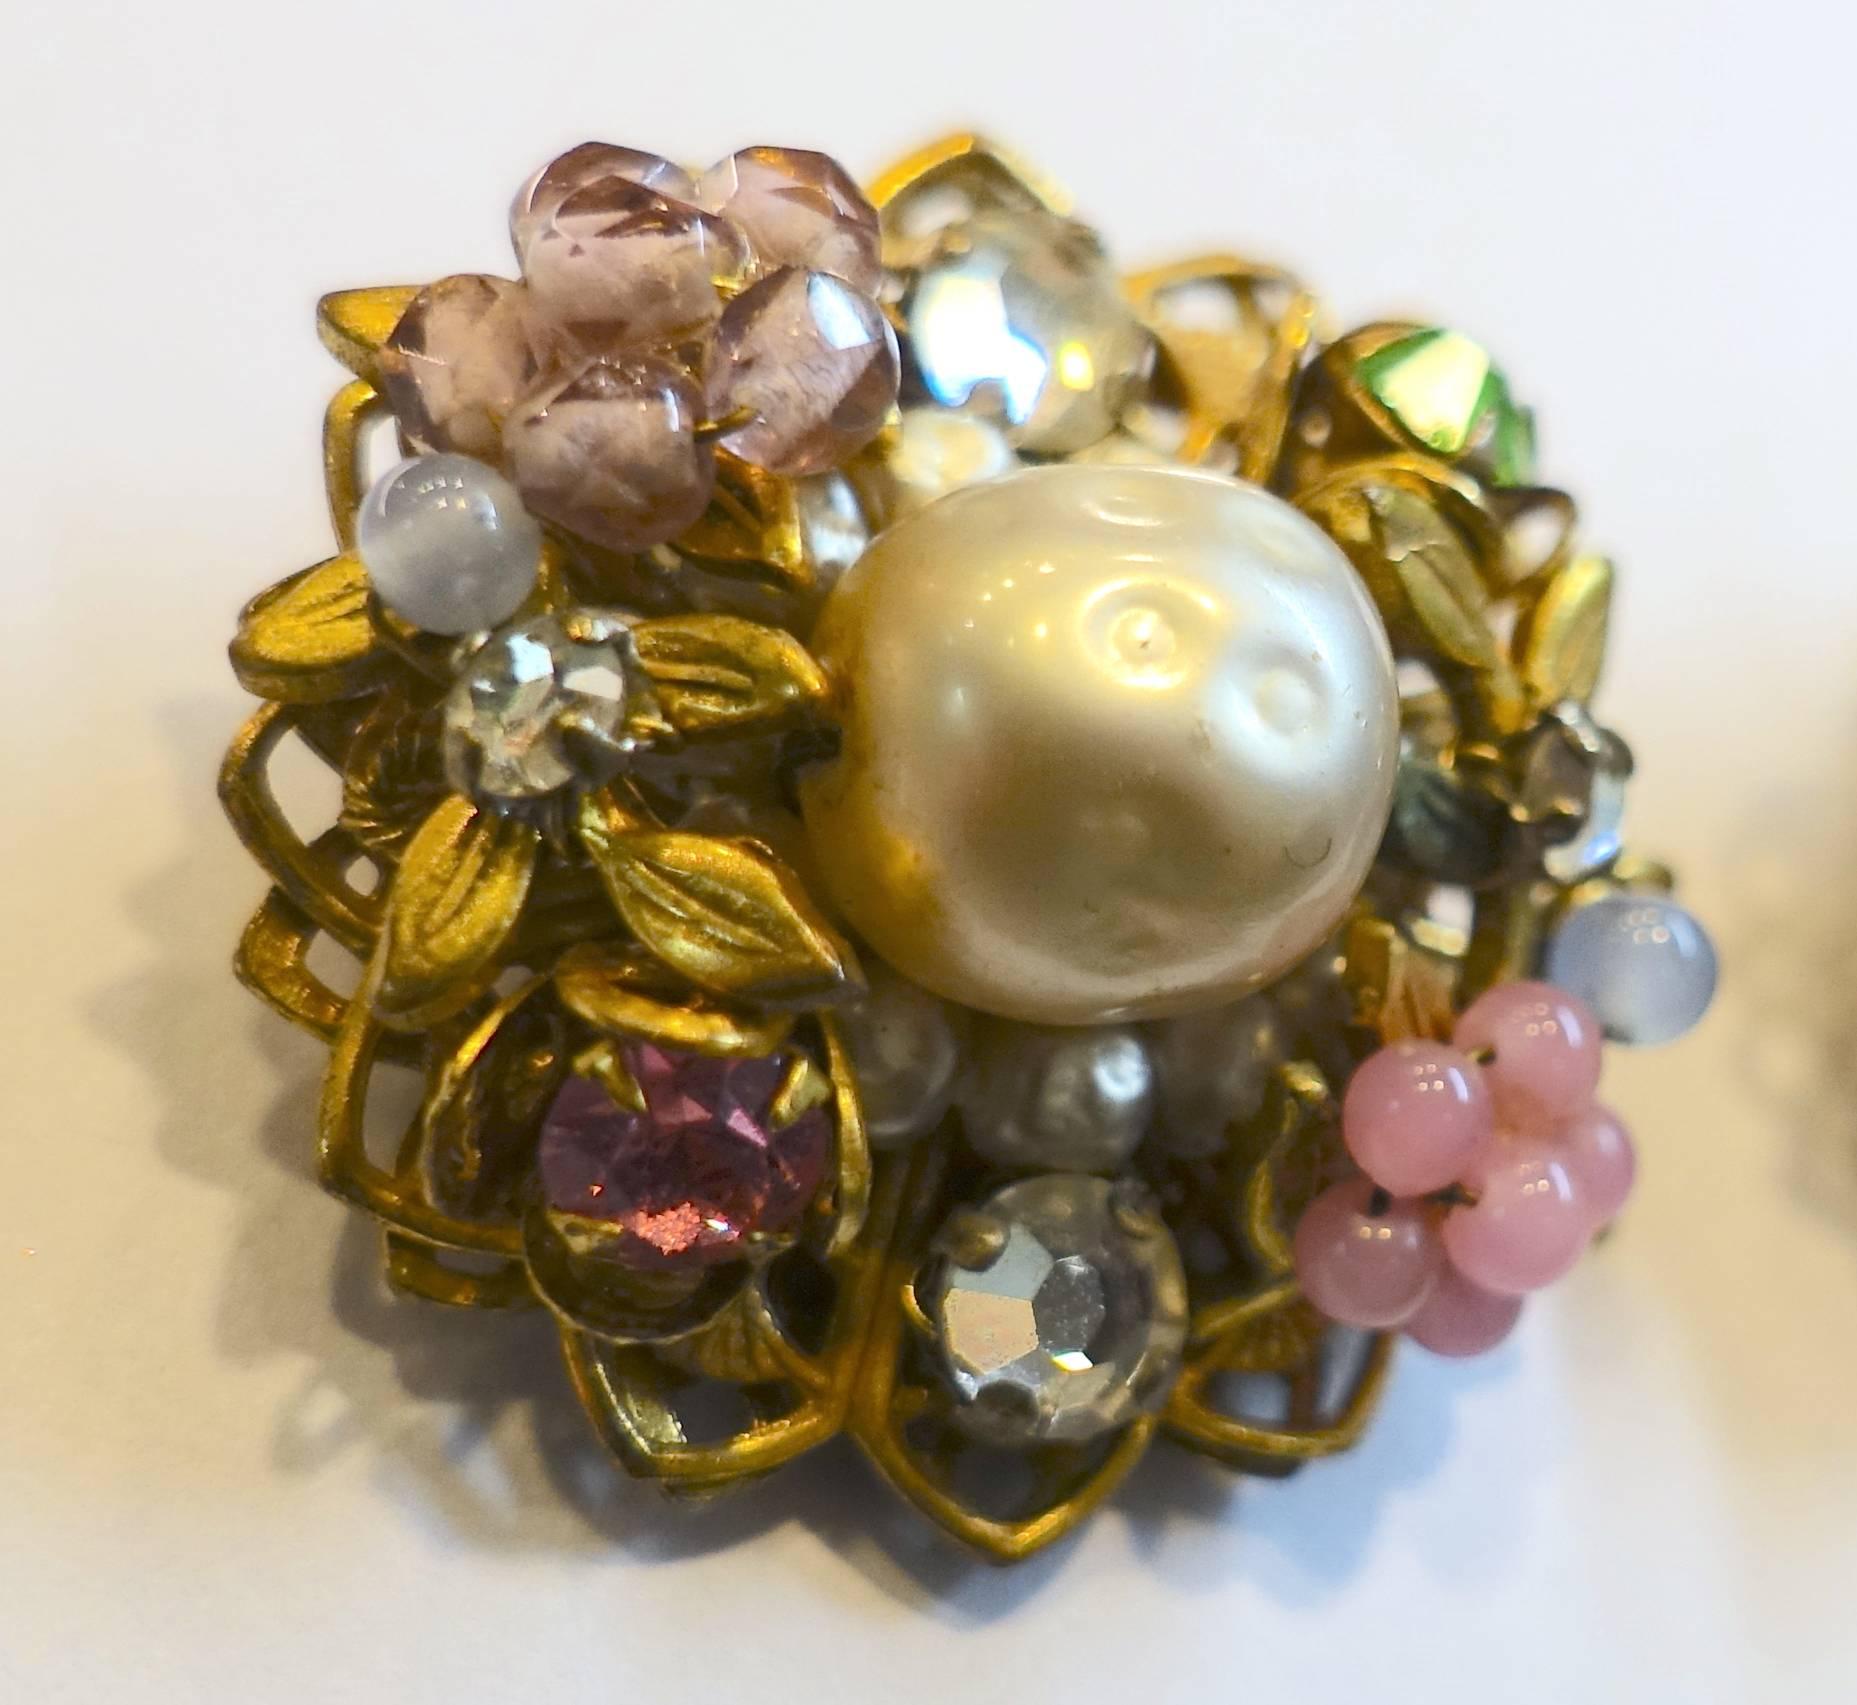 These clip earrings have a large faux baroque pearl center combining lavender bugle beads, blue rhinestones, pink beads that form a flower and green rhinestones lying on gold tone leaves.  It measures 1” and signed “DeMario”.  These earrings are in